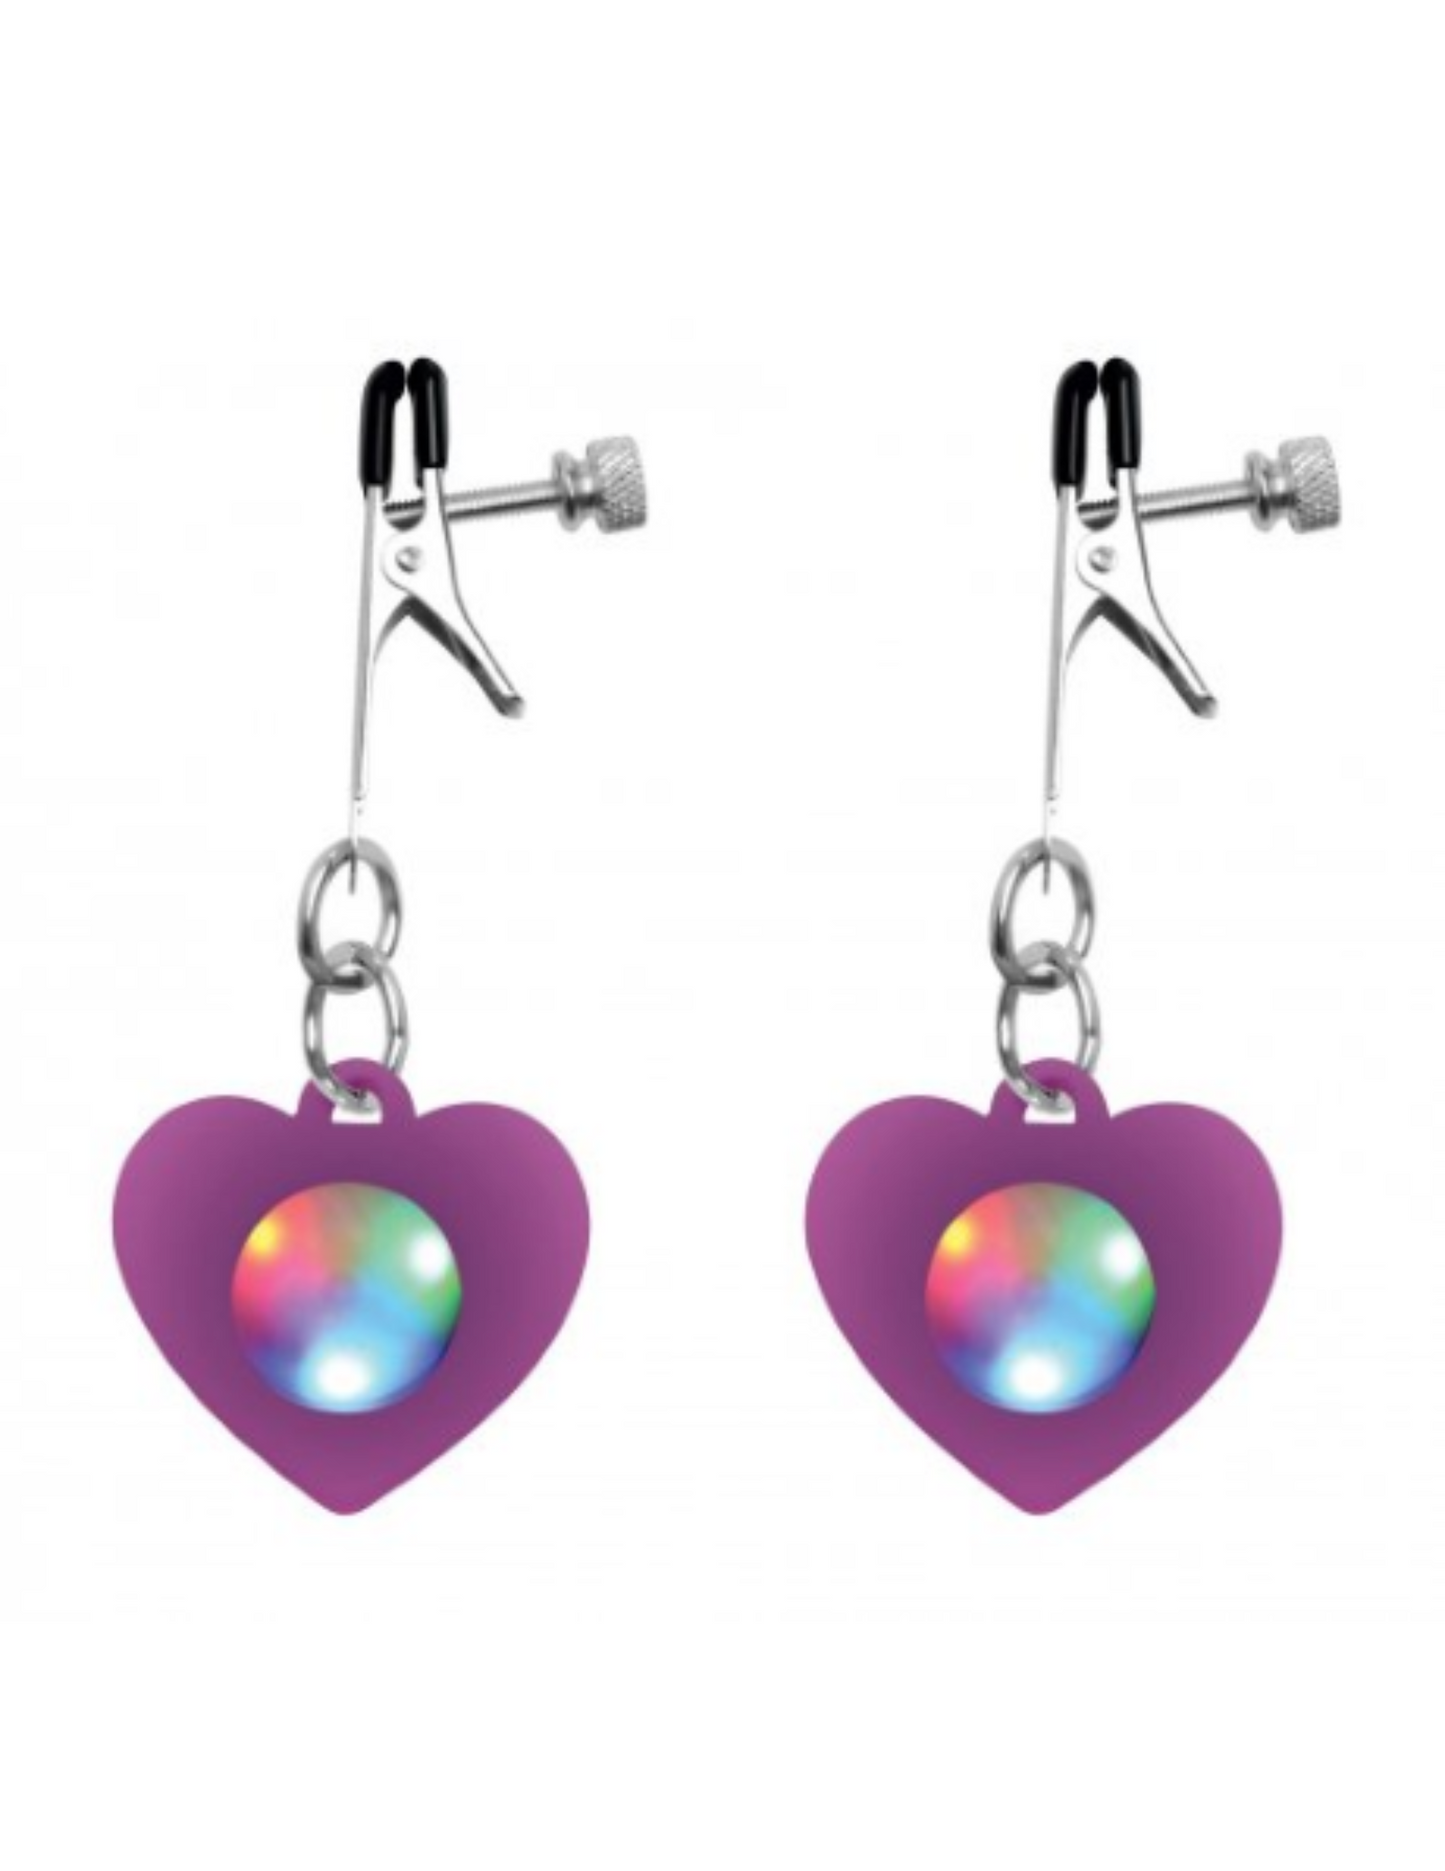 Purple heart LED nipple clamps with white background.